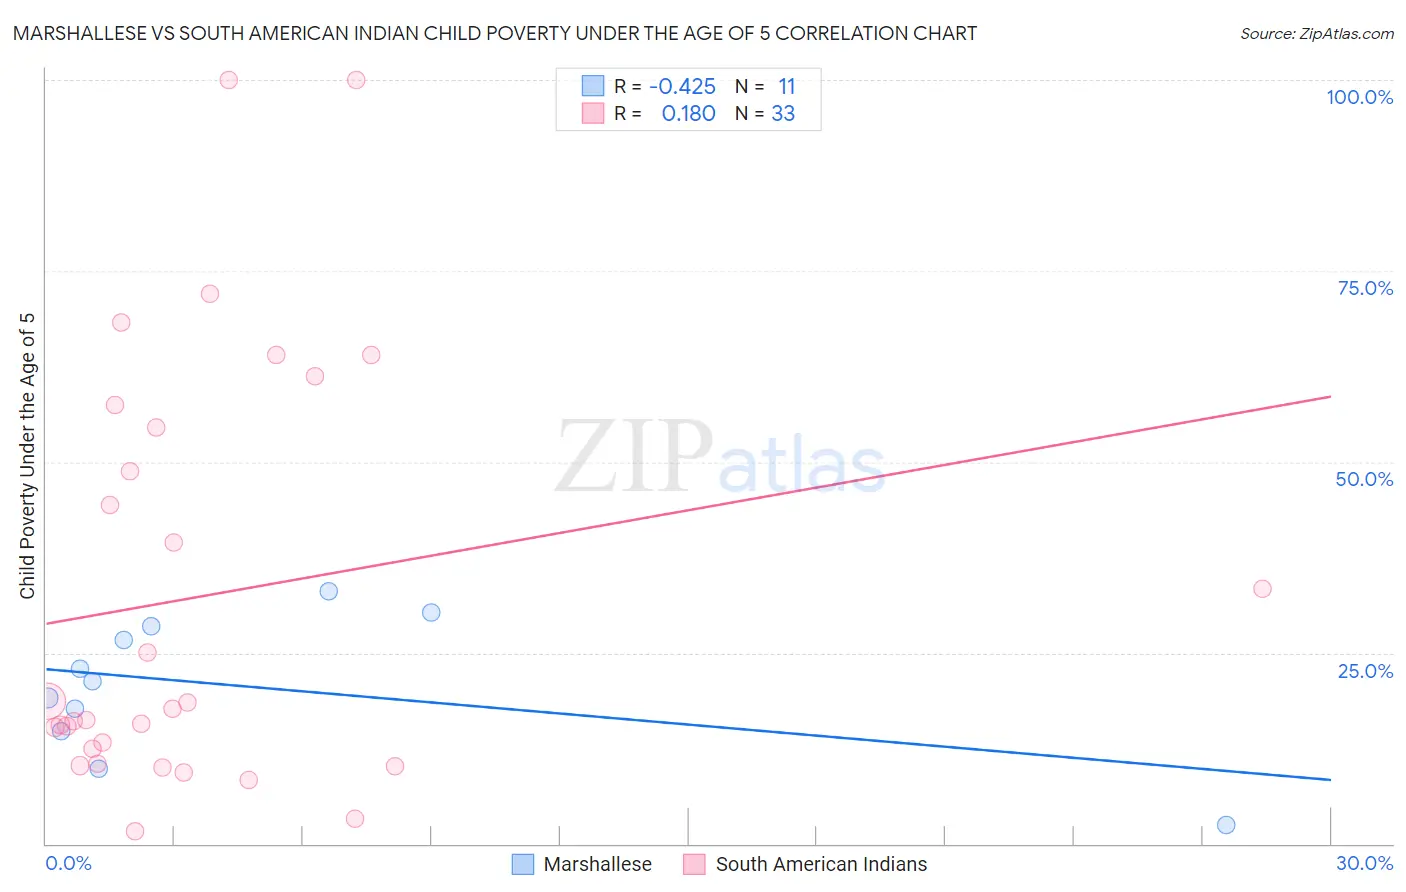 Marshallese vs South American Indian Child Poverty Under the Age of 5